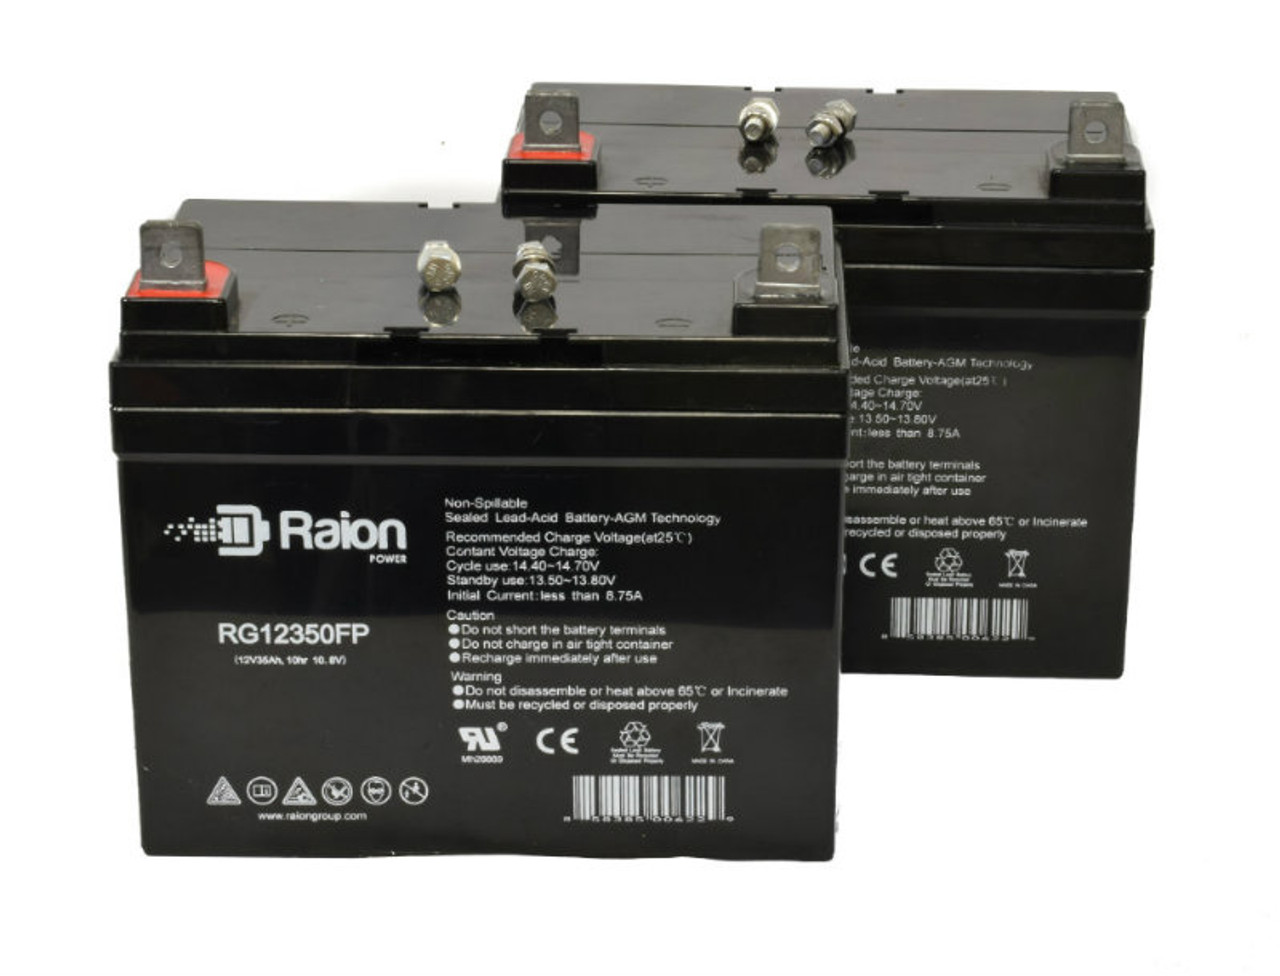 Raion Power Replacement 12V 35Ah Lawn Mower Battery for Ingersol Equipment 3014 - 2 Pack